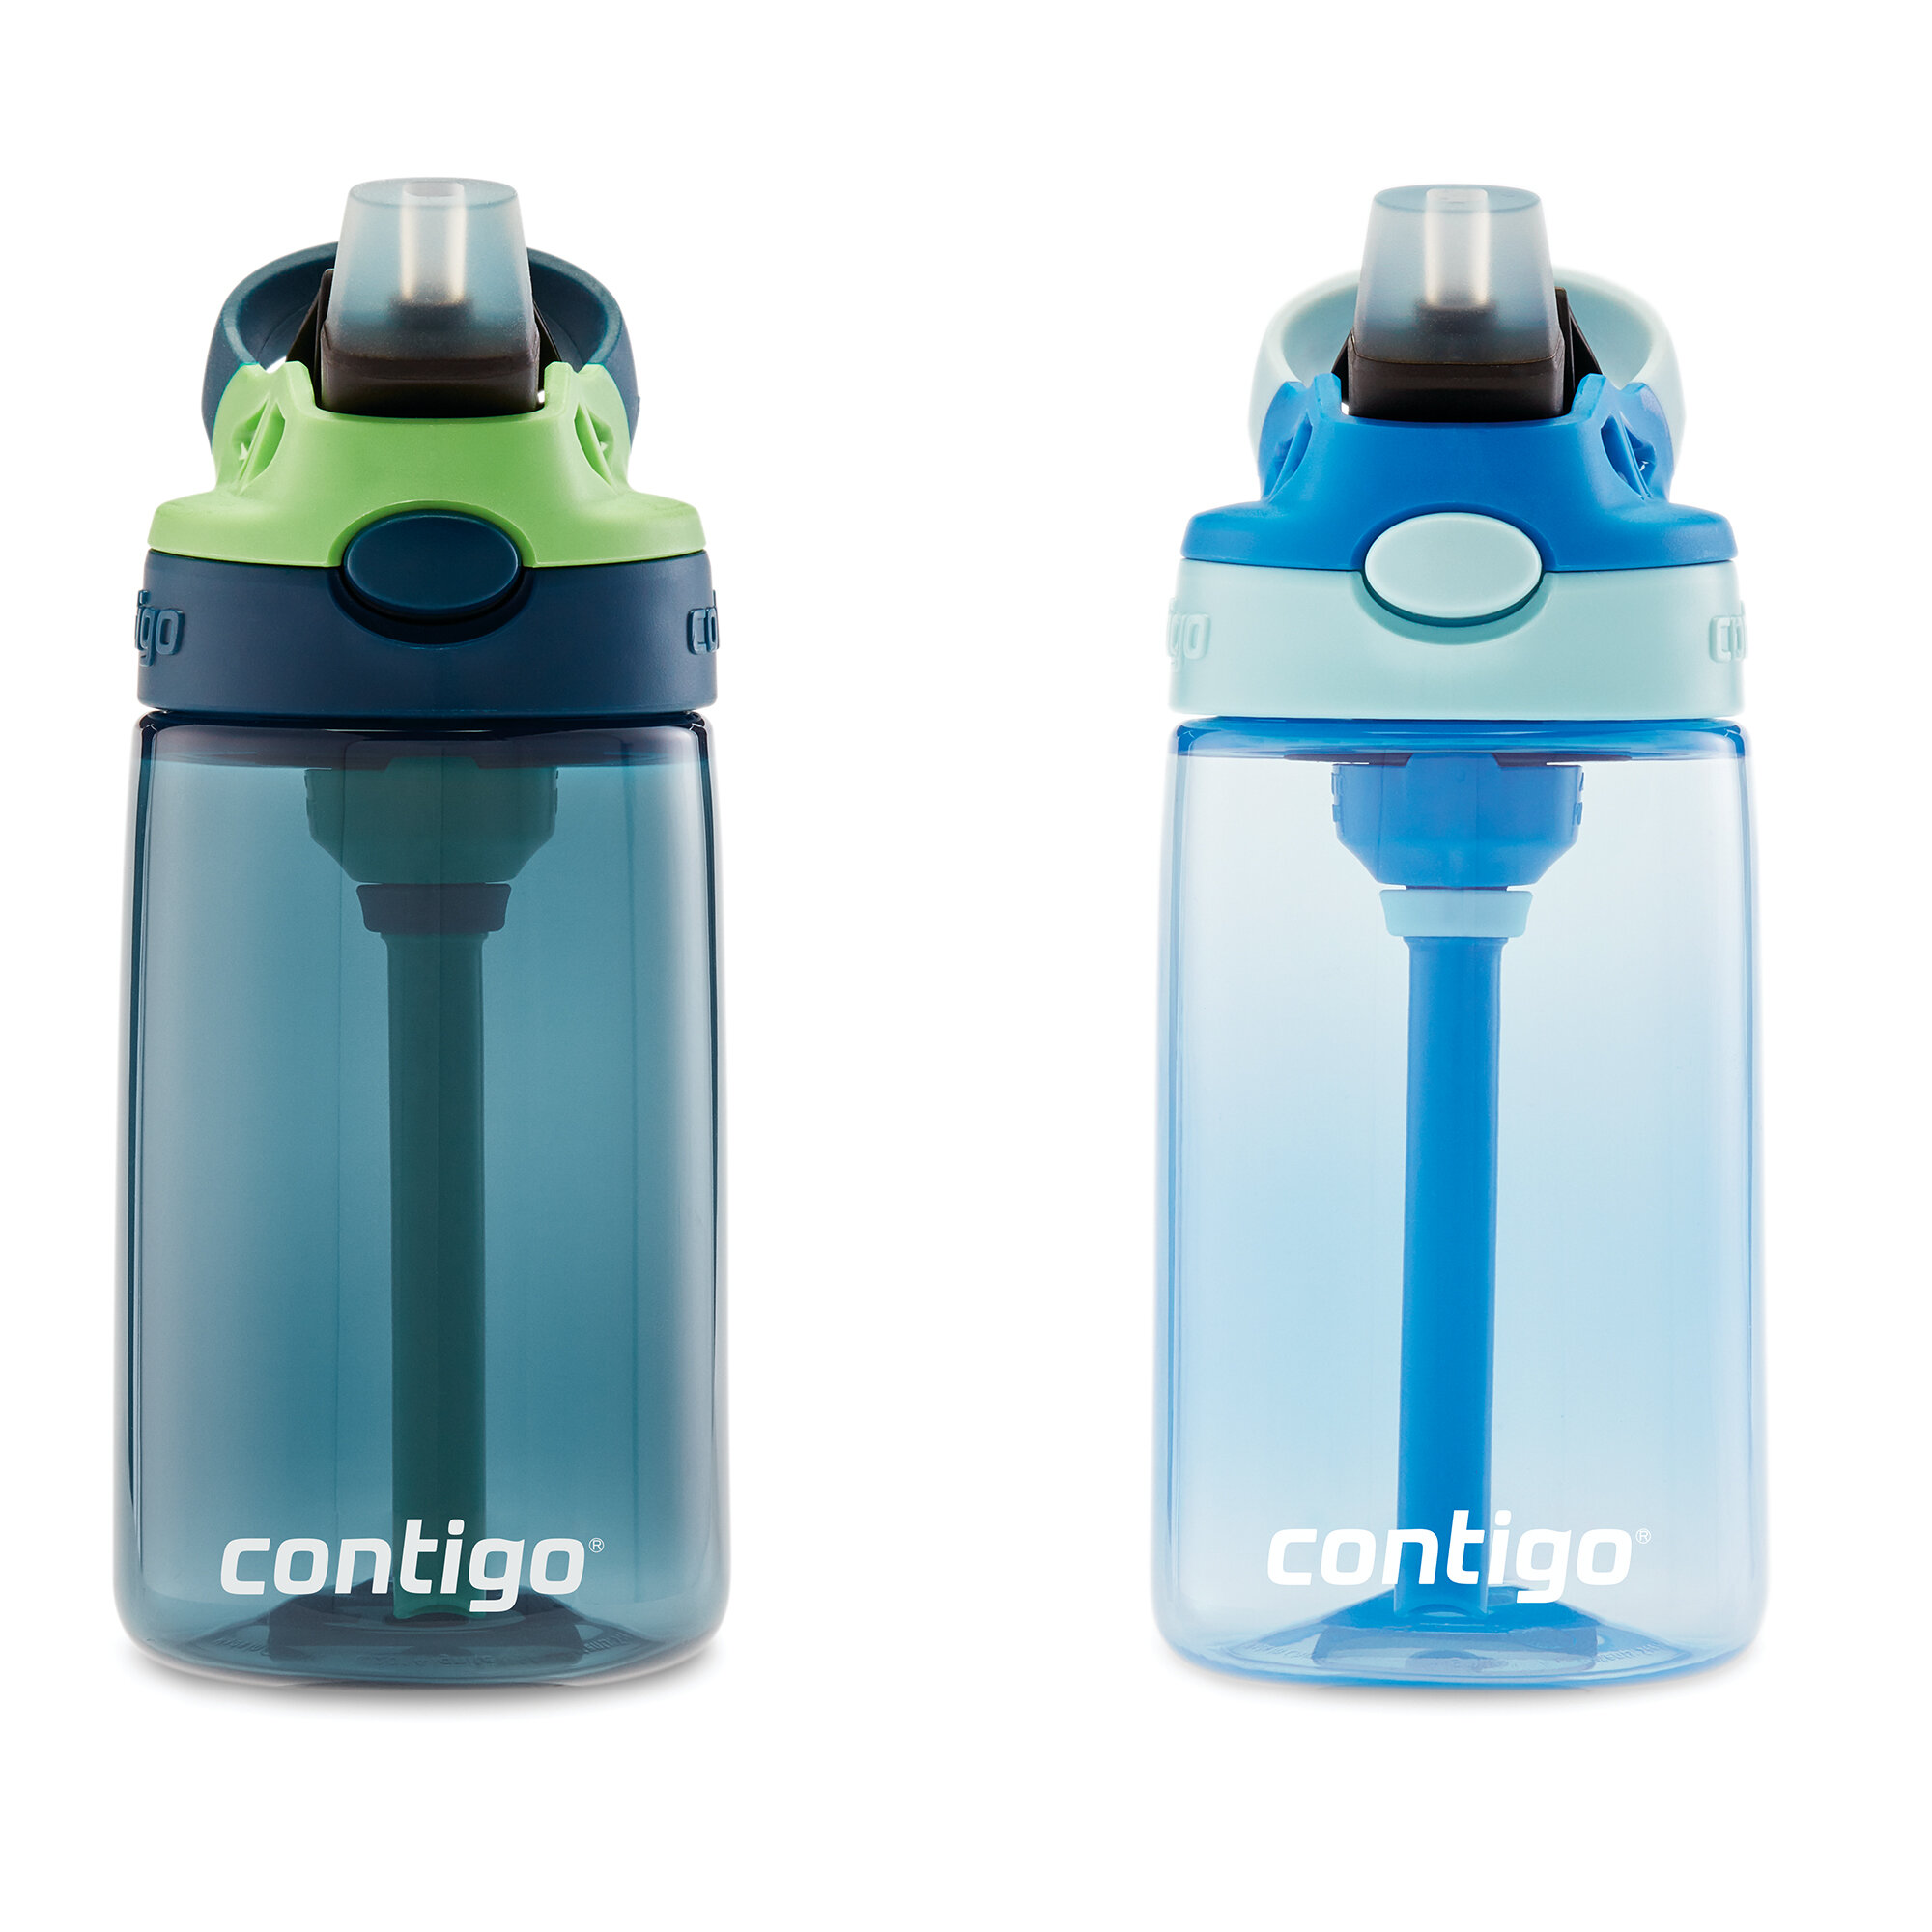 Contigo Water Bottle Blueberry 20 Ounce, Beverage Storage Containers